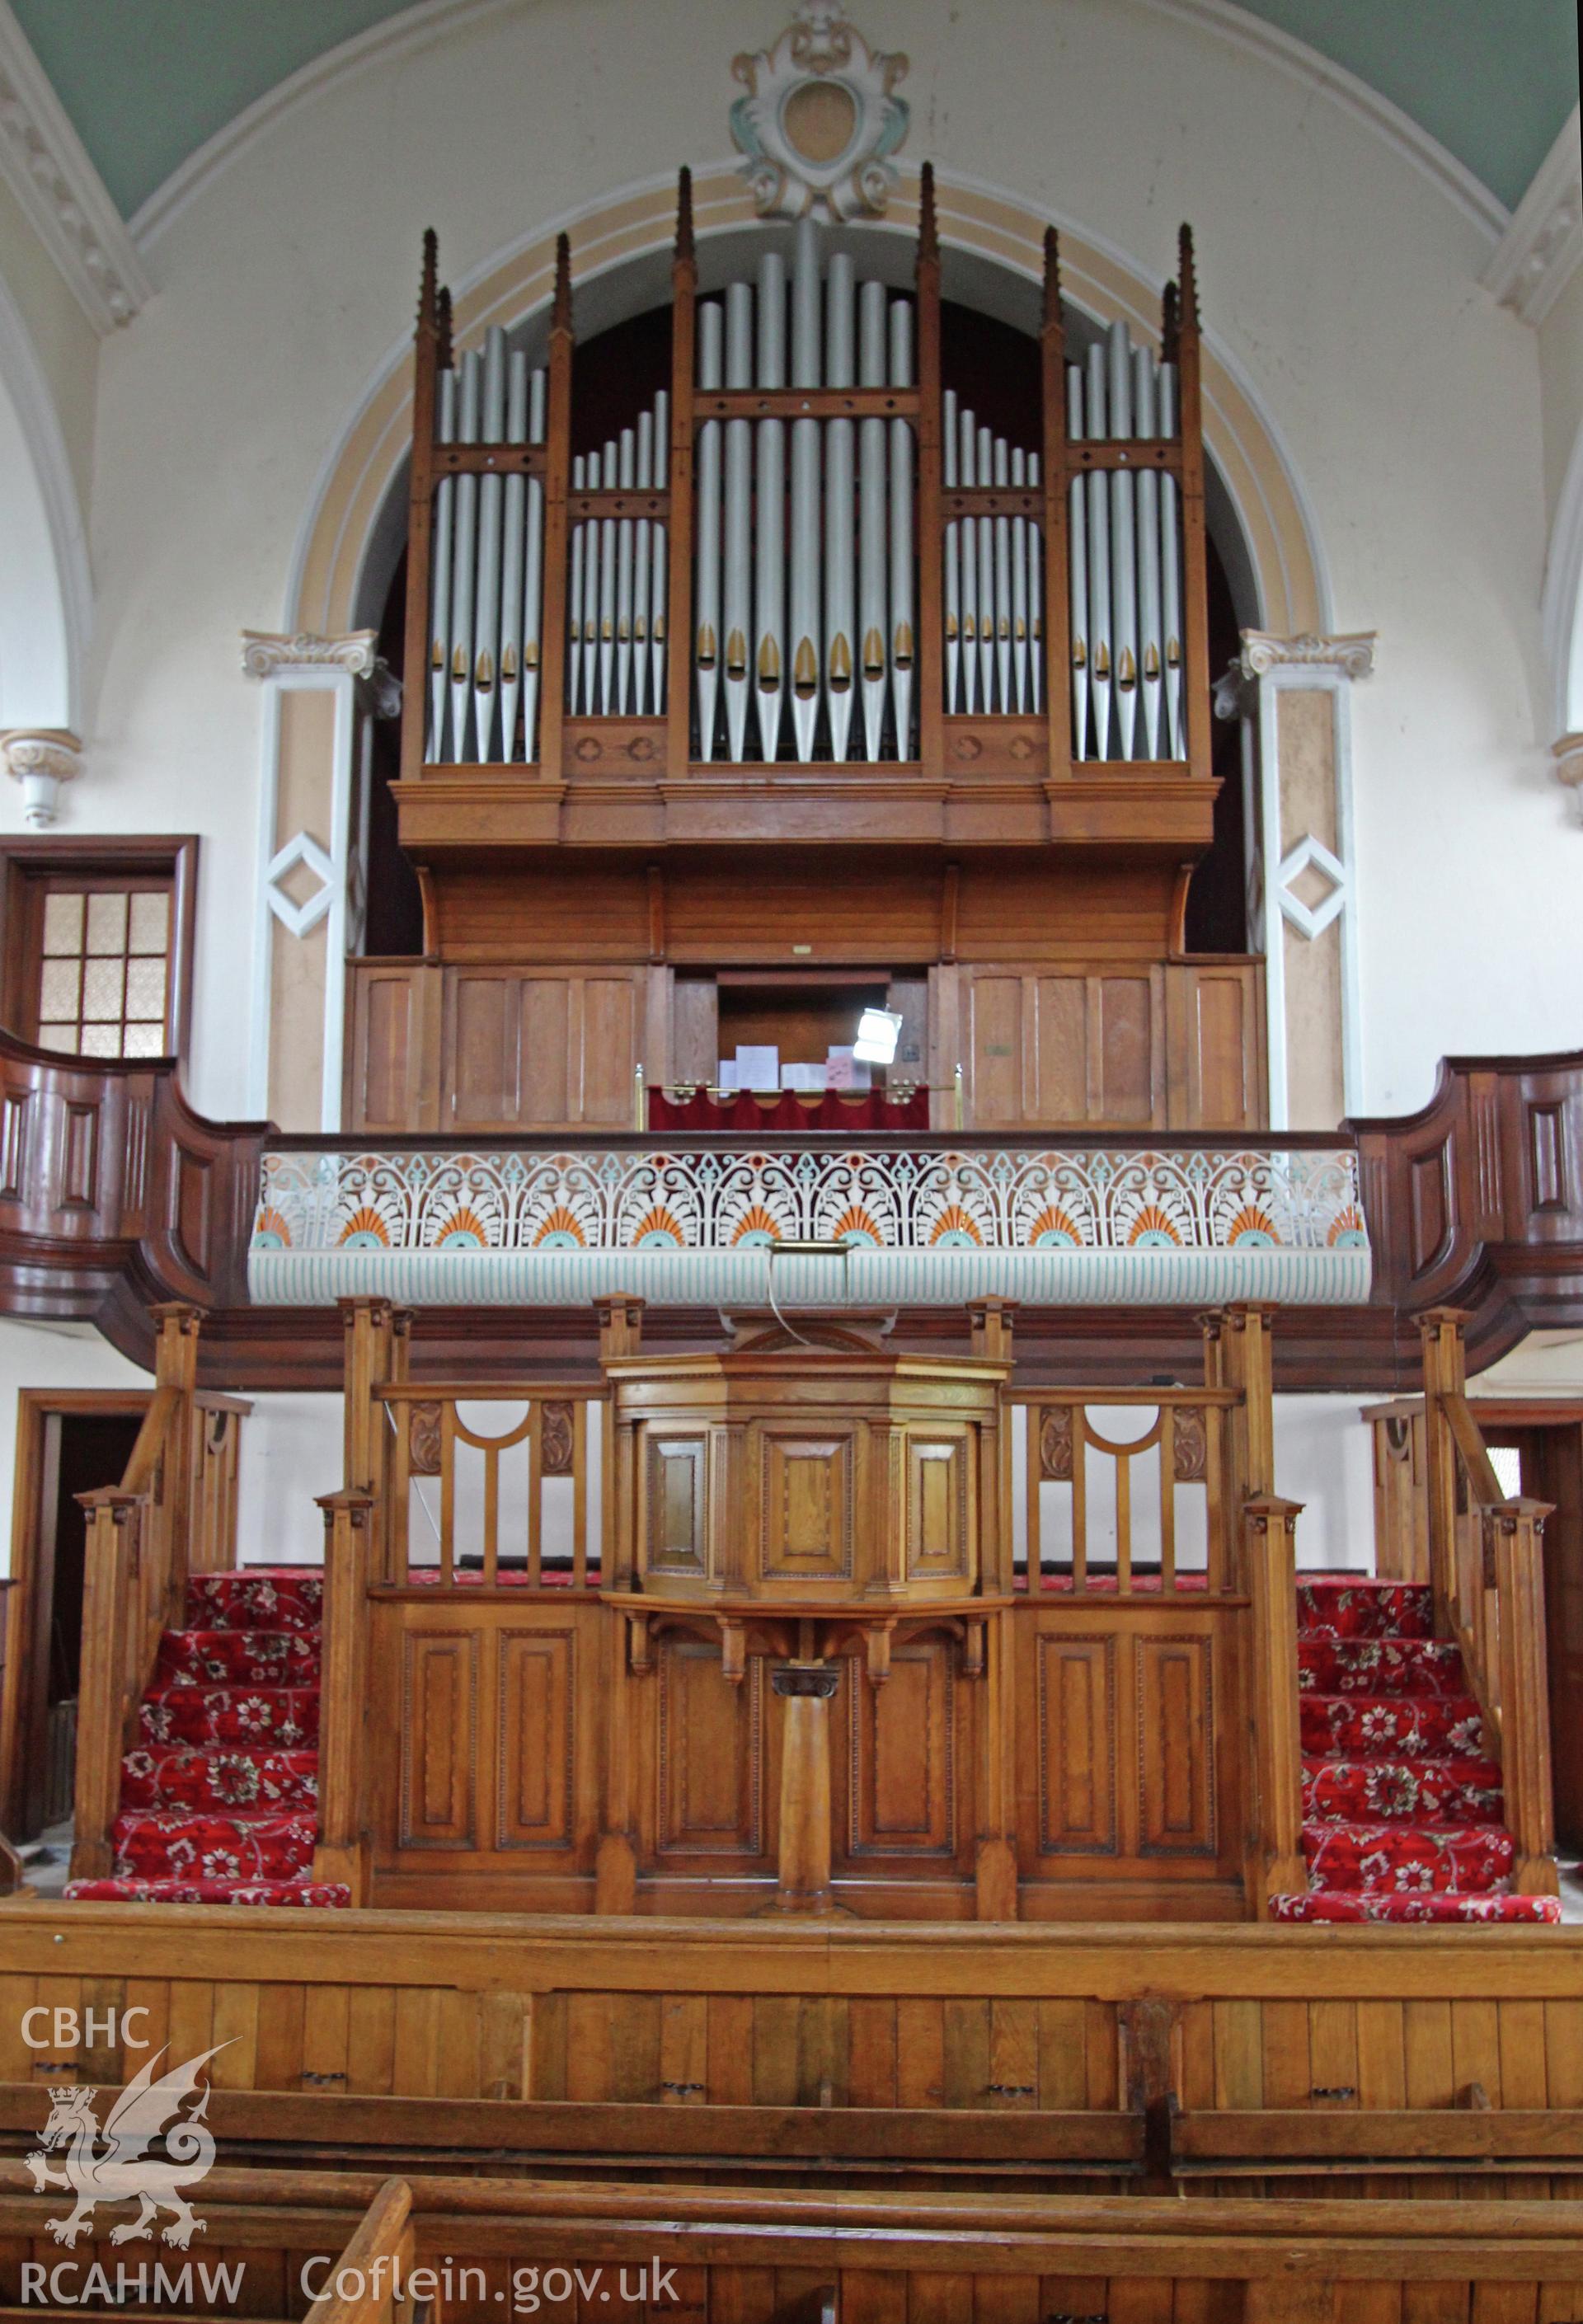 Bethel Independent Chapel, Pen-Clawdd, interior detail of pulpit and organ